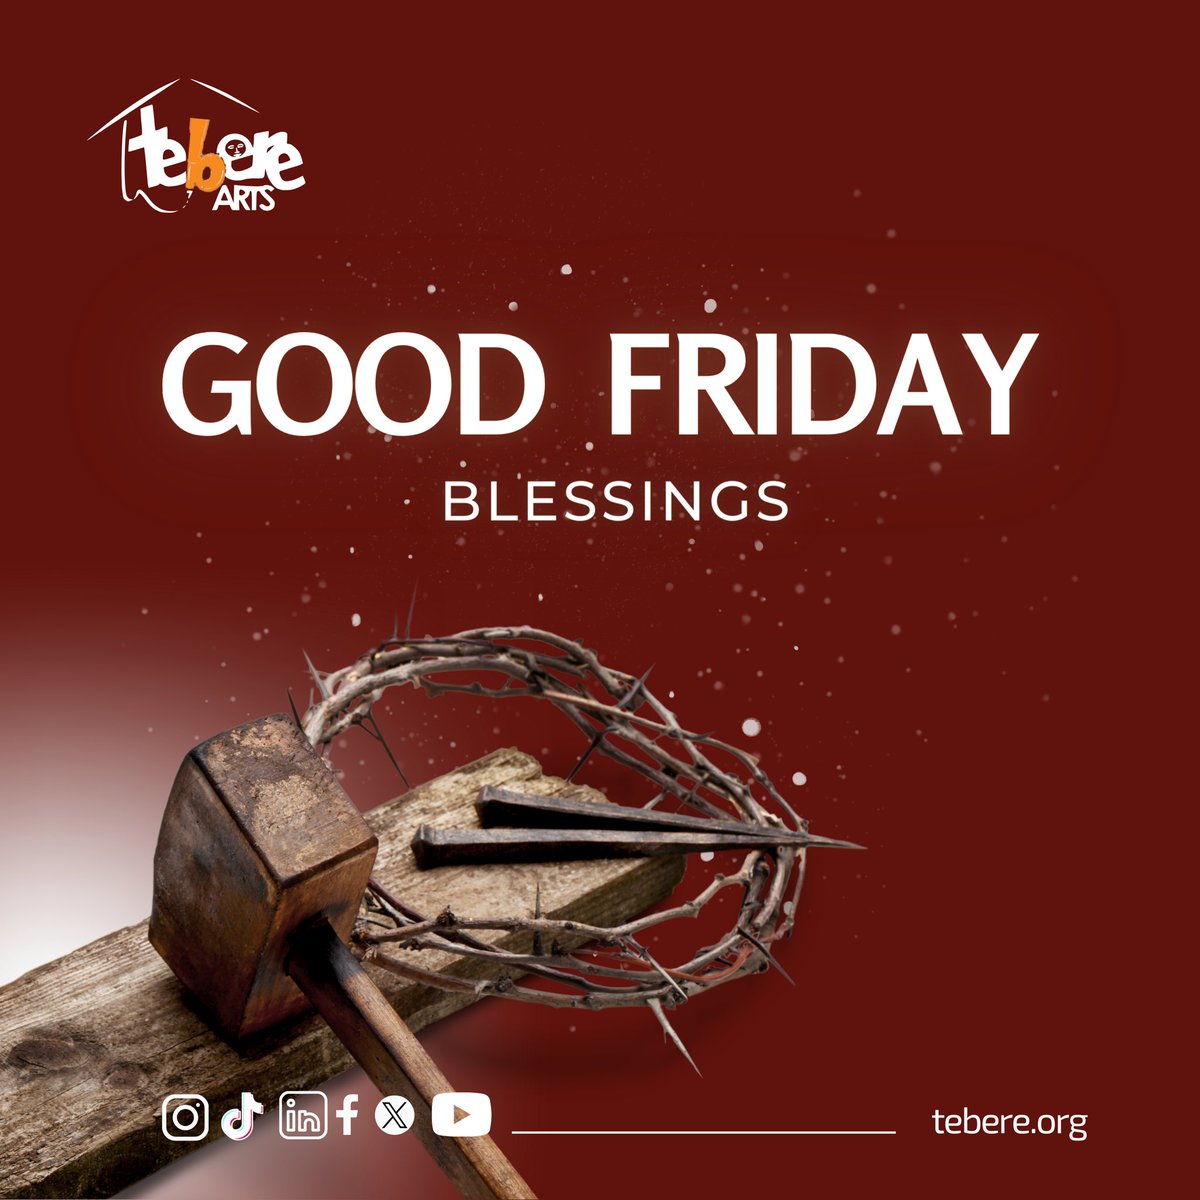 Blessed Good Friday to all, where the stage is set for reflection and renewal. Just as the drama of Christ's trial unfolds, let us remember the power of storytelling to inspire change and unite hearts.